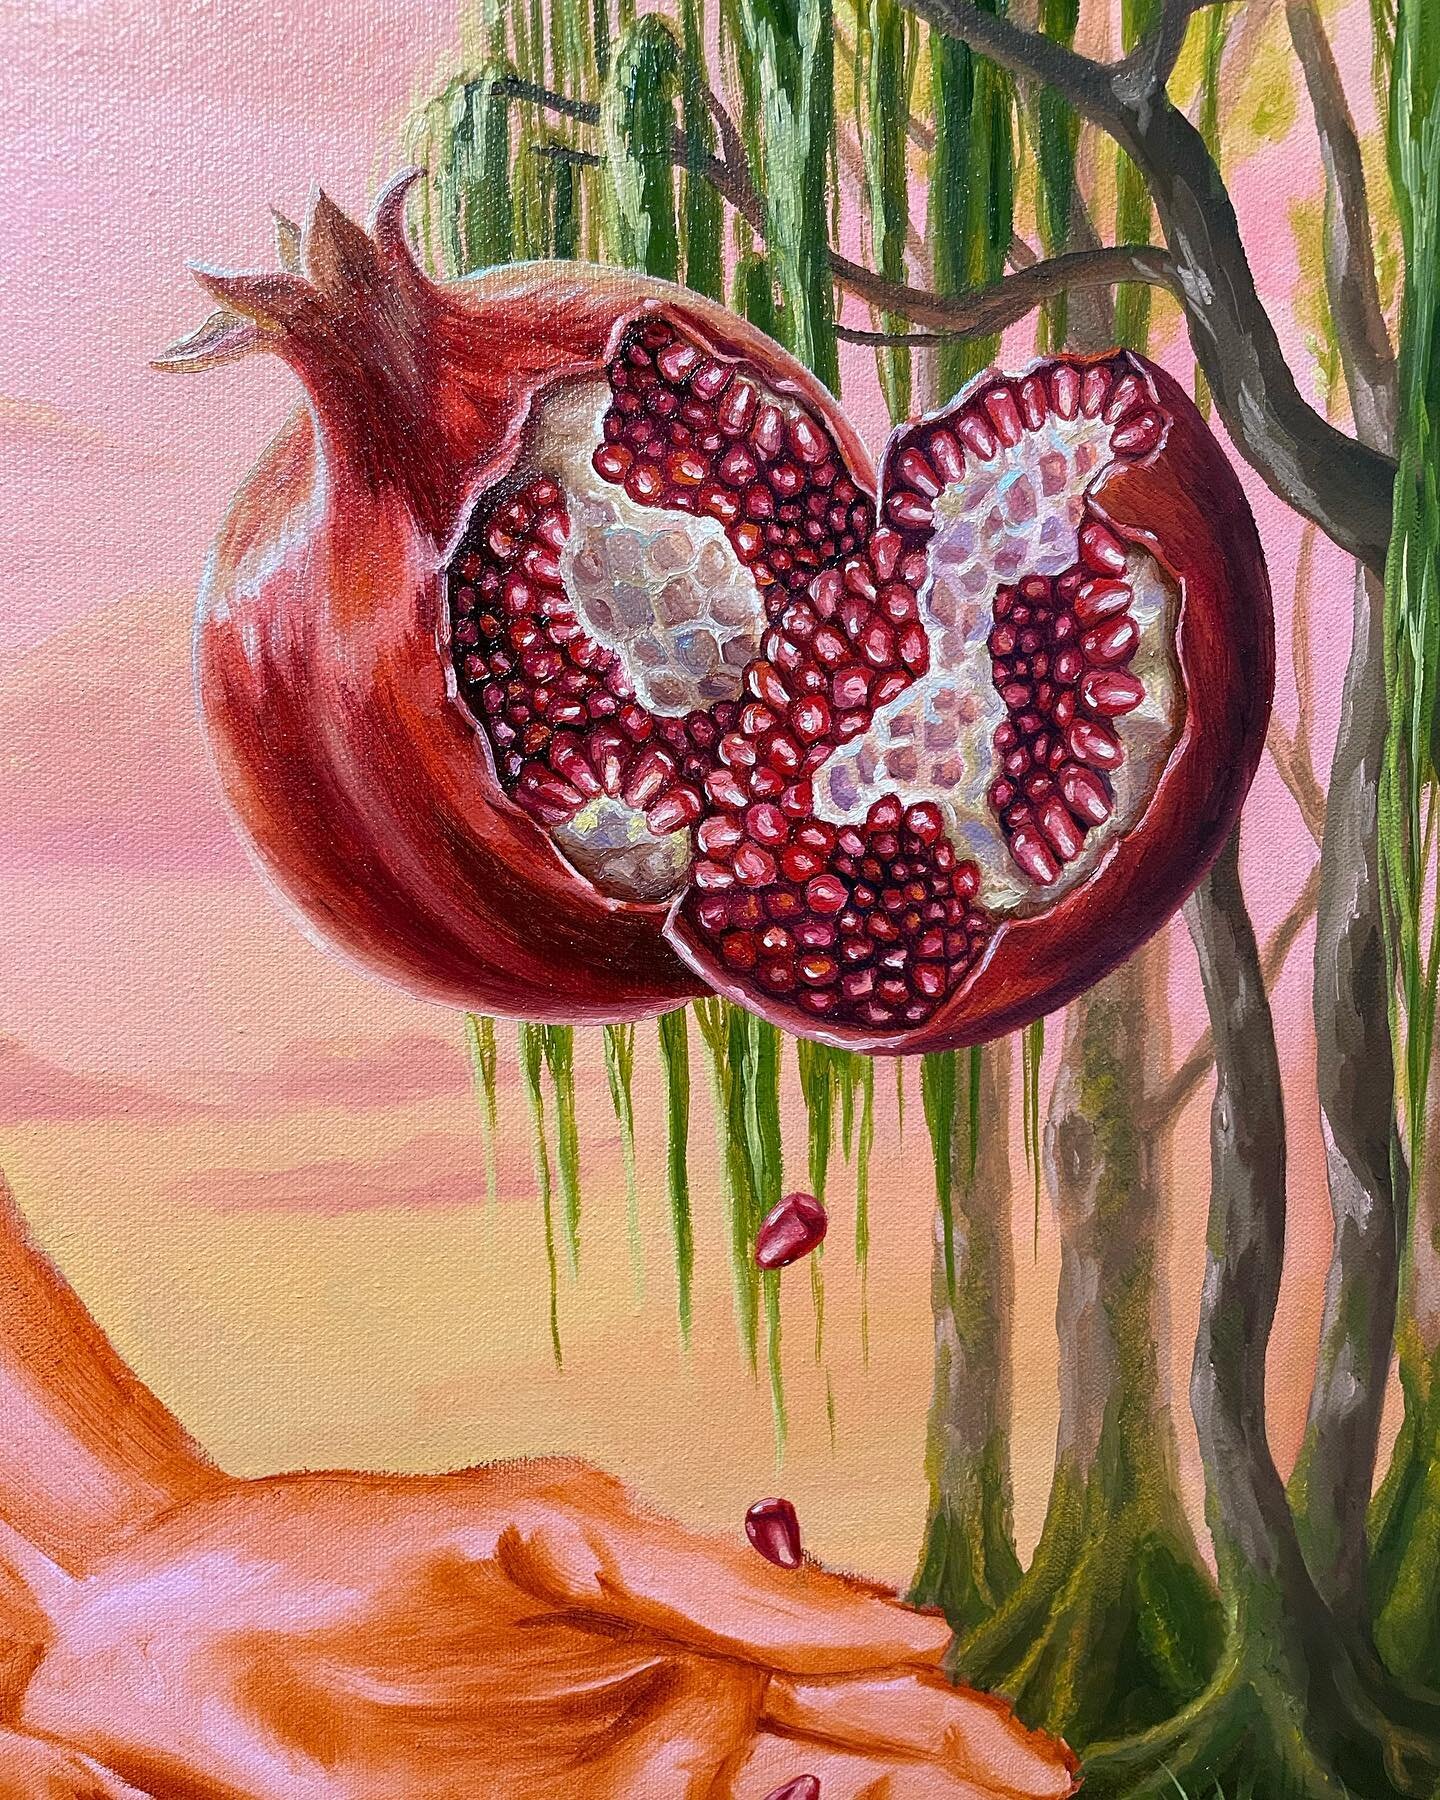 some recent progress pics of my latest piece ❤️✨

#wip #oilpainting #witchcraft #pomegranate #wipart